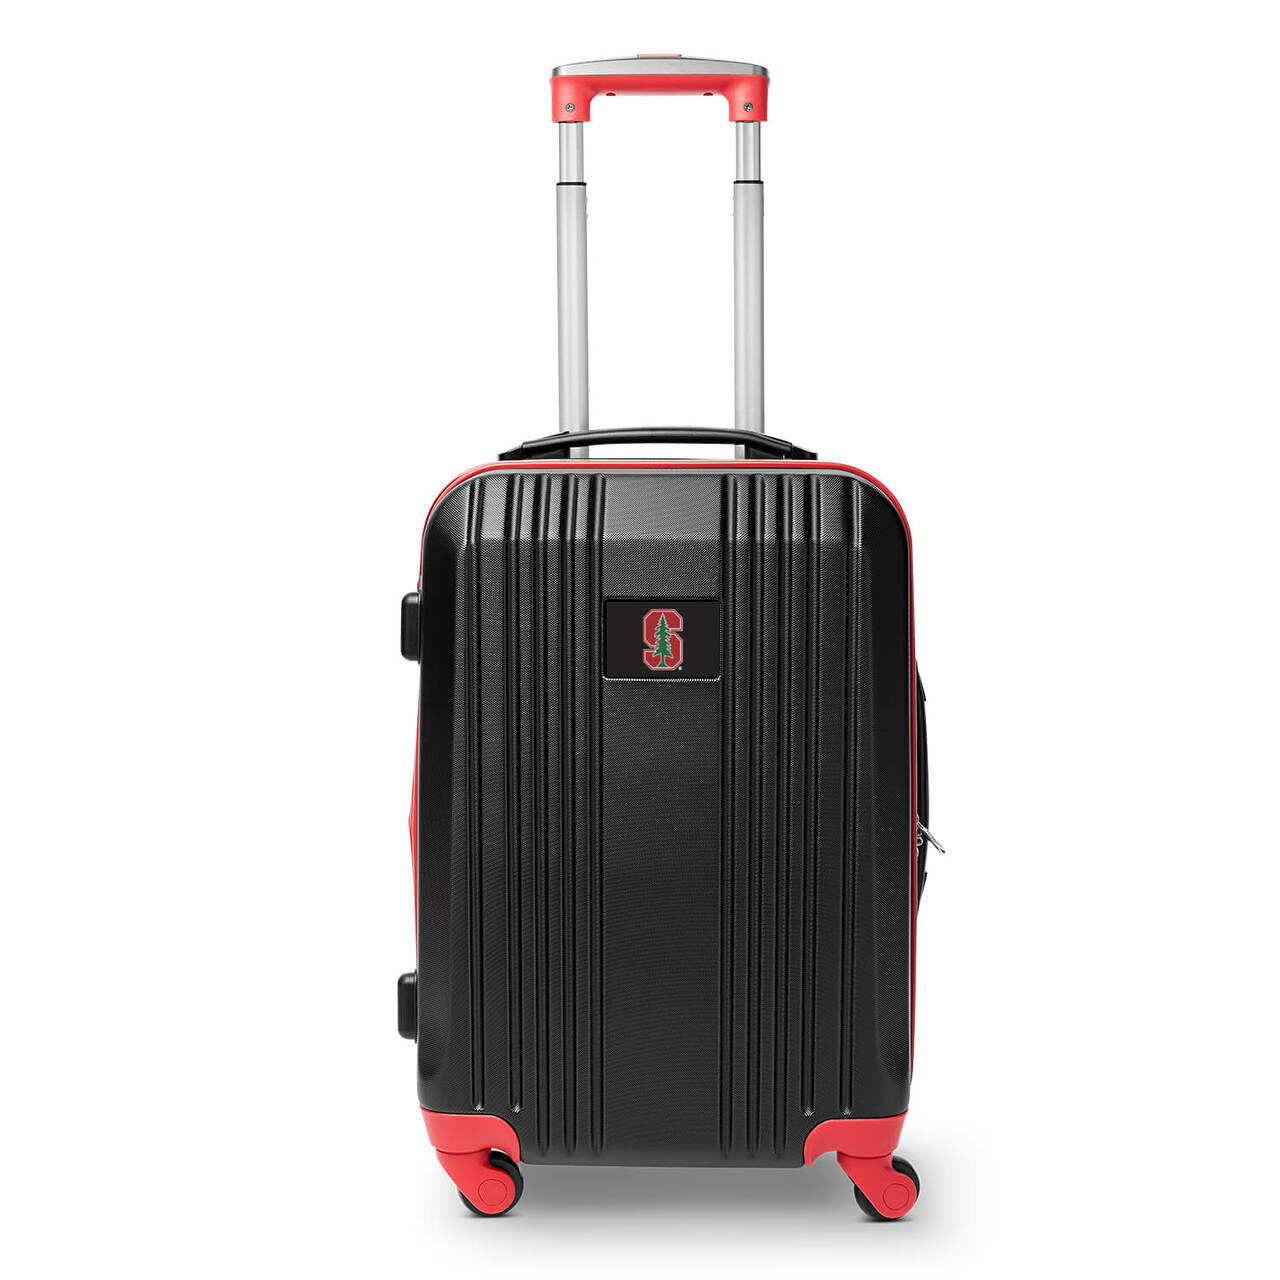 Stanford Carry On Spinner Luggage | Stanford Hardcase Two-Tone Luggage Carry-on Spinner in Red